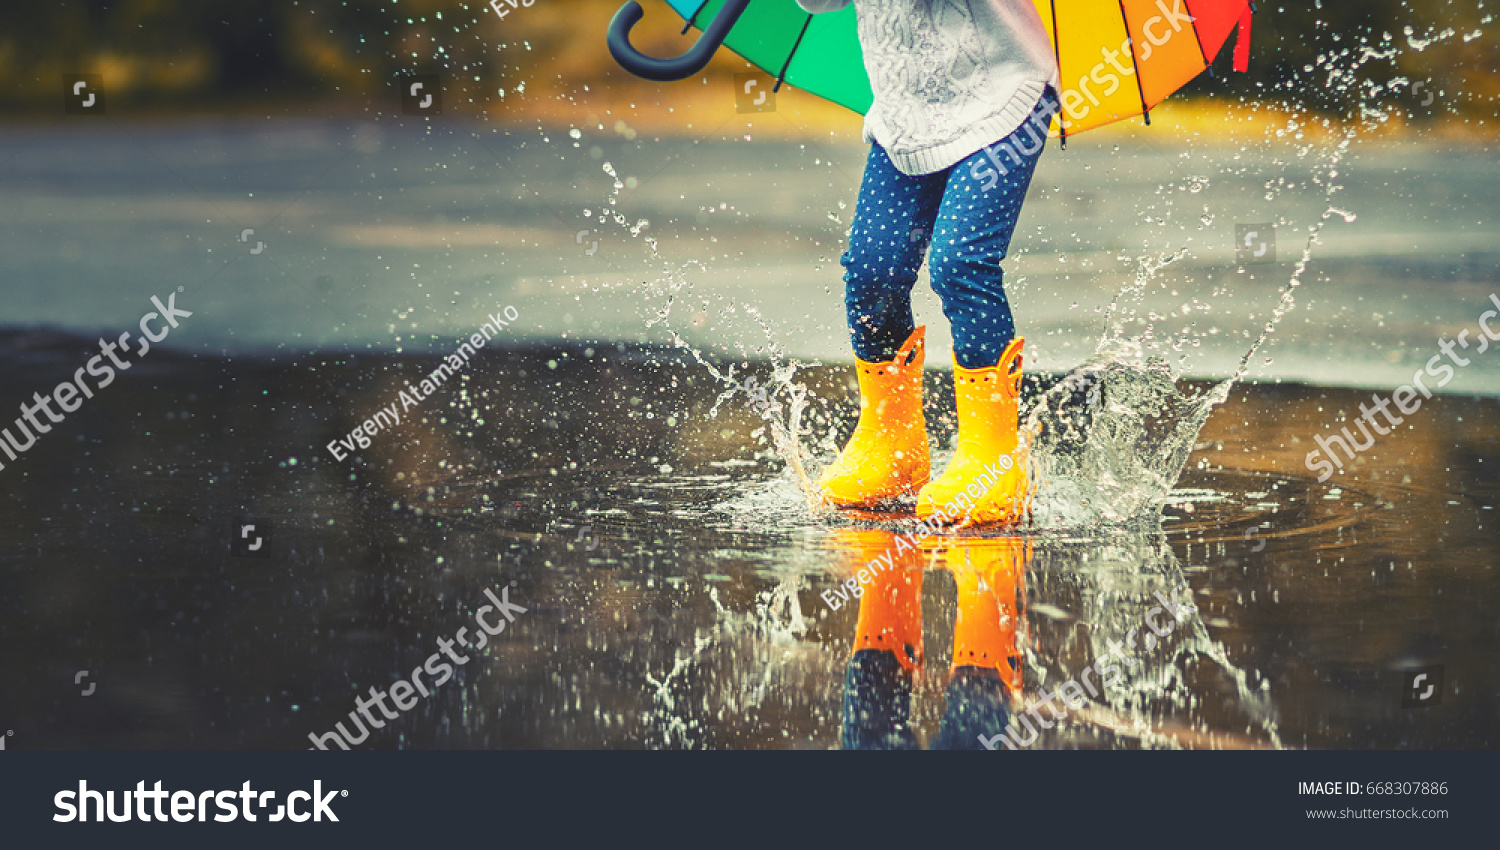 Feet of child in yellow rubber boots jumping over a puddle in the rain
 #668307886